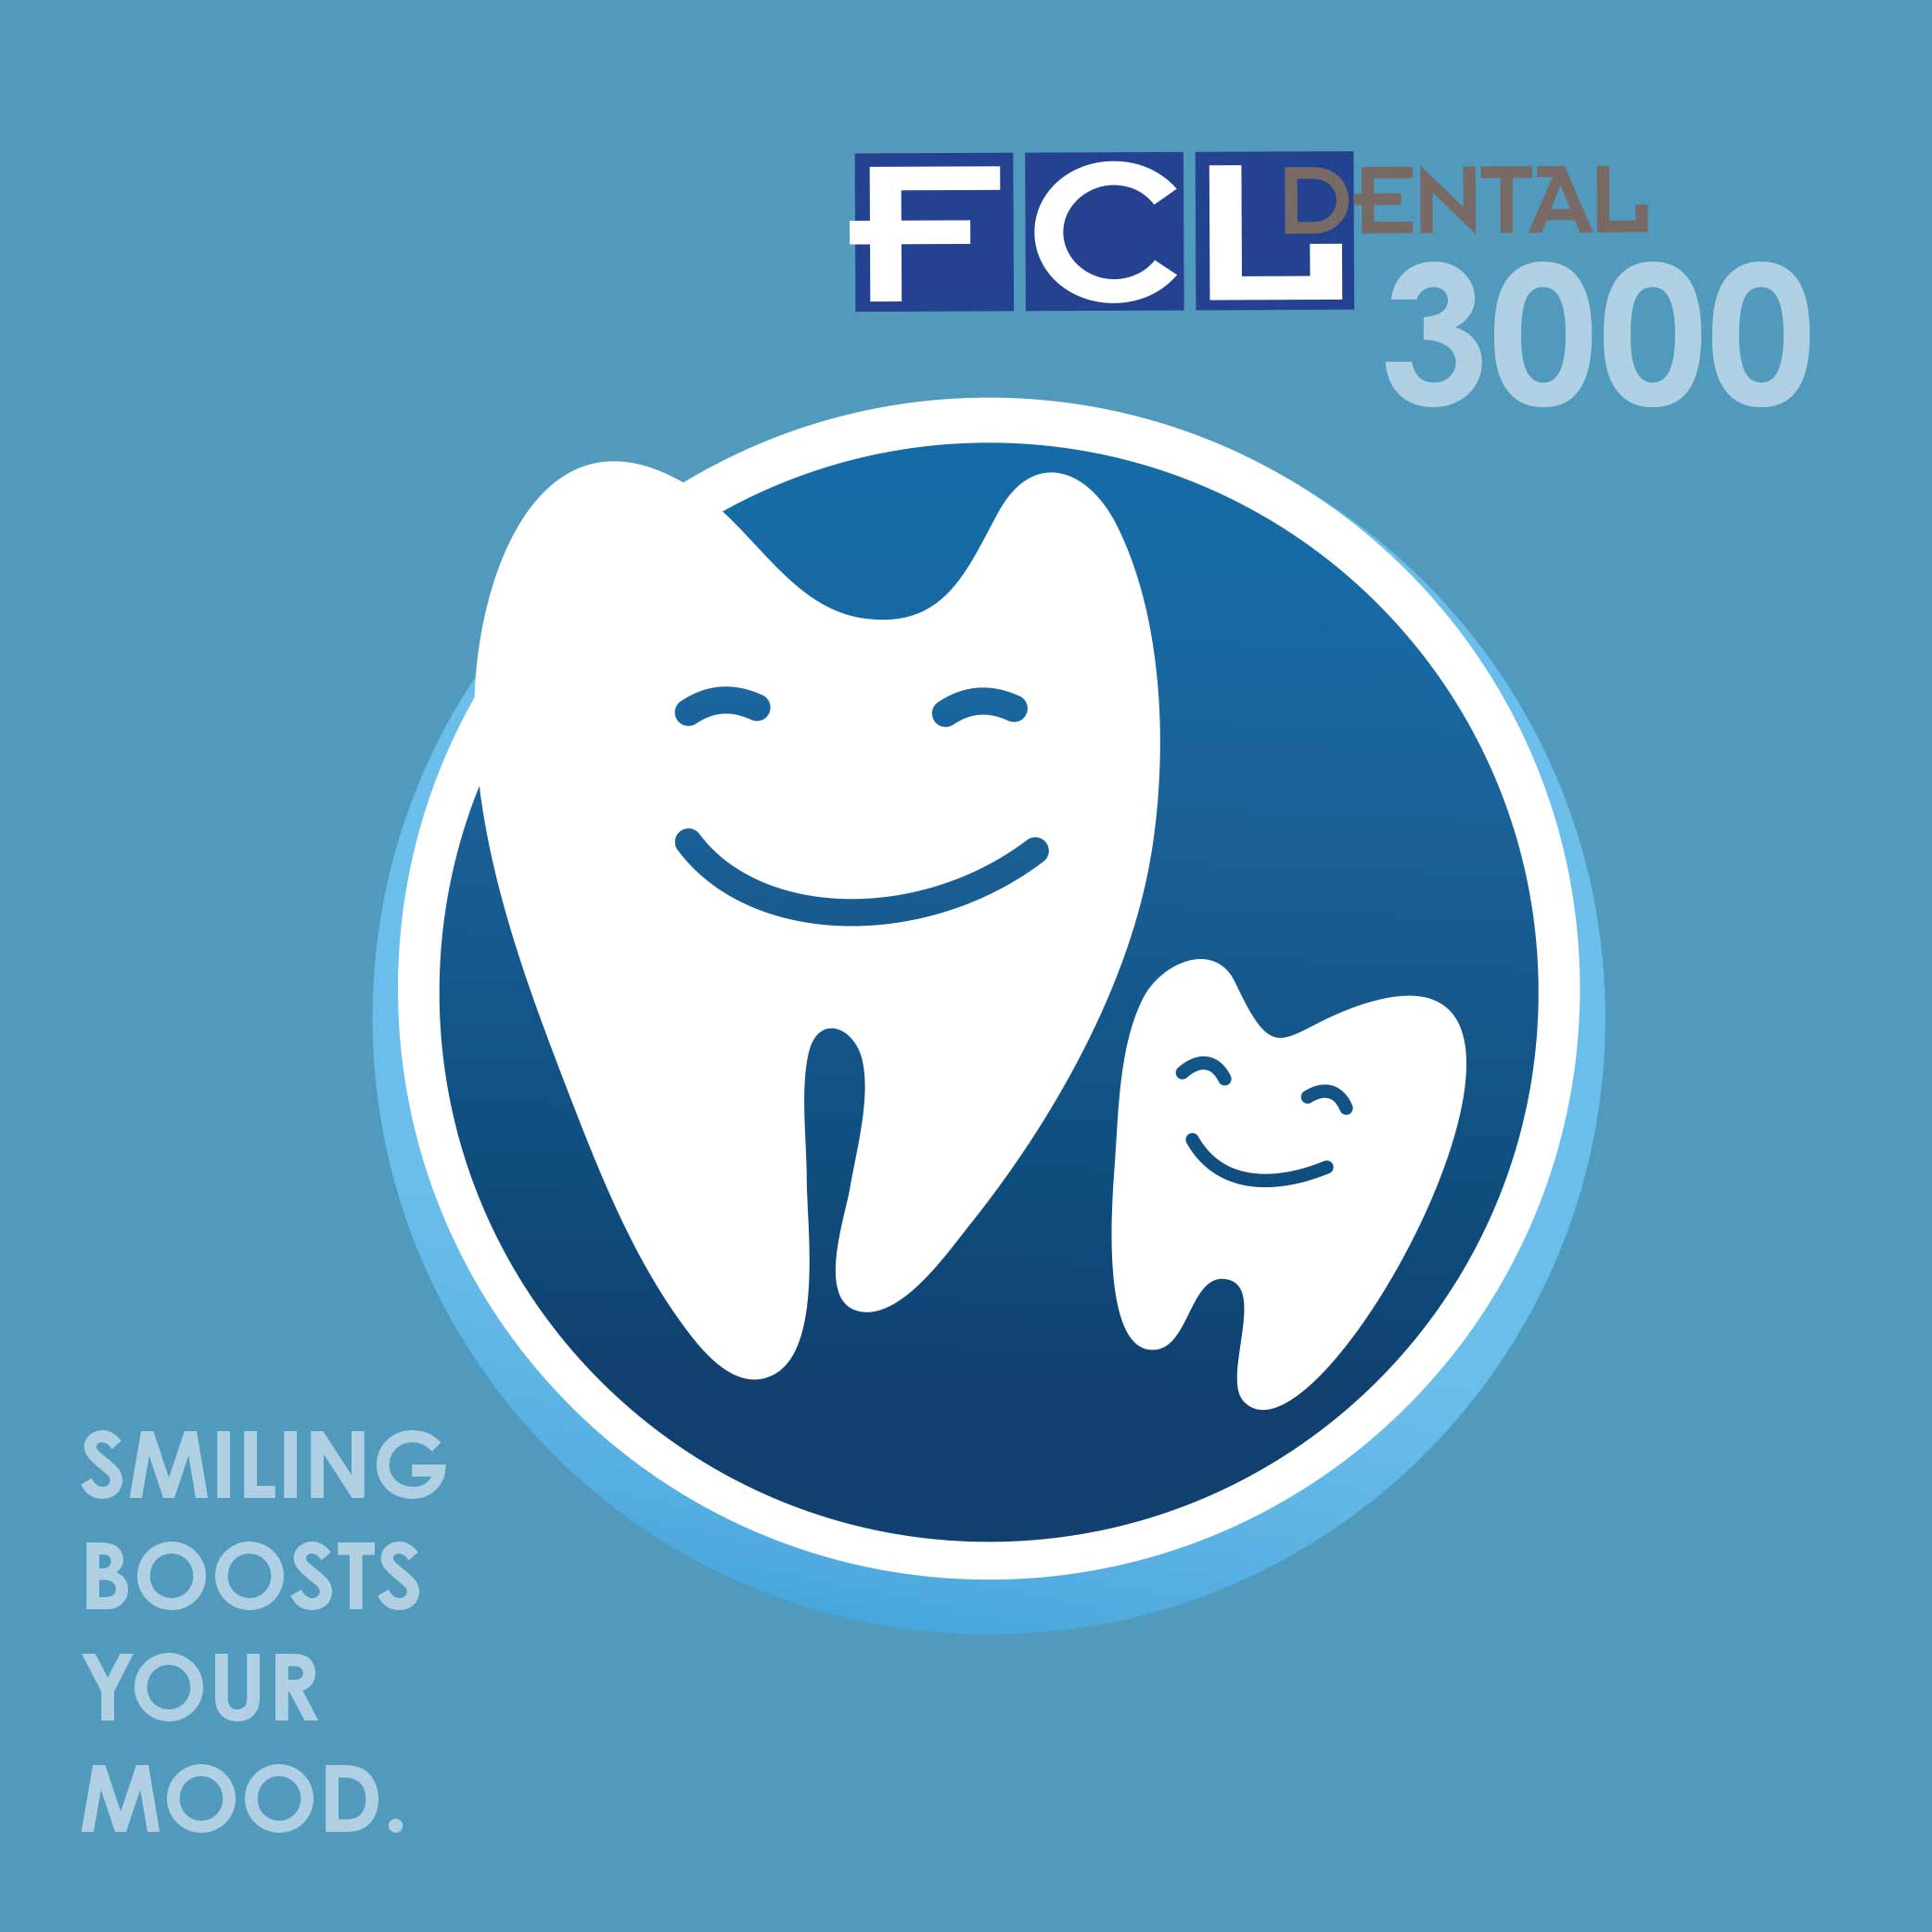 FCL Dental 3000 underwritten by First Continental Life Insurance Company (FCL)